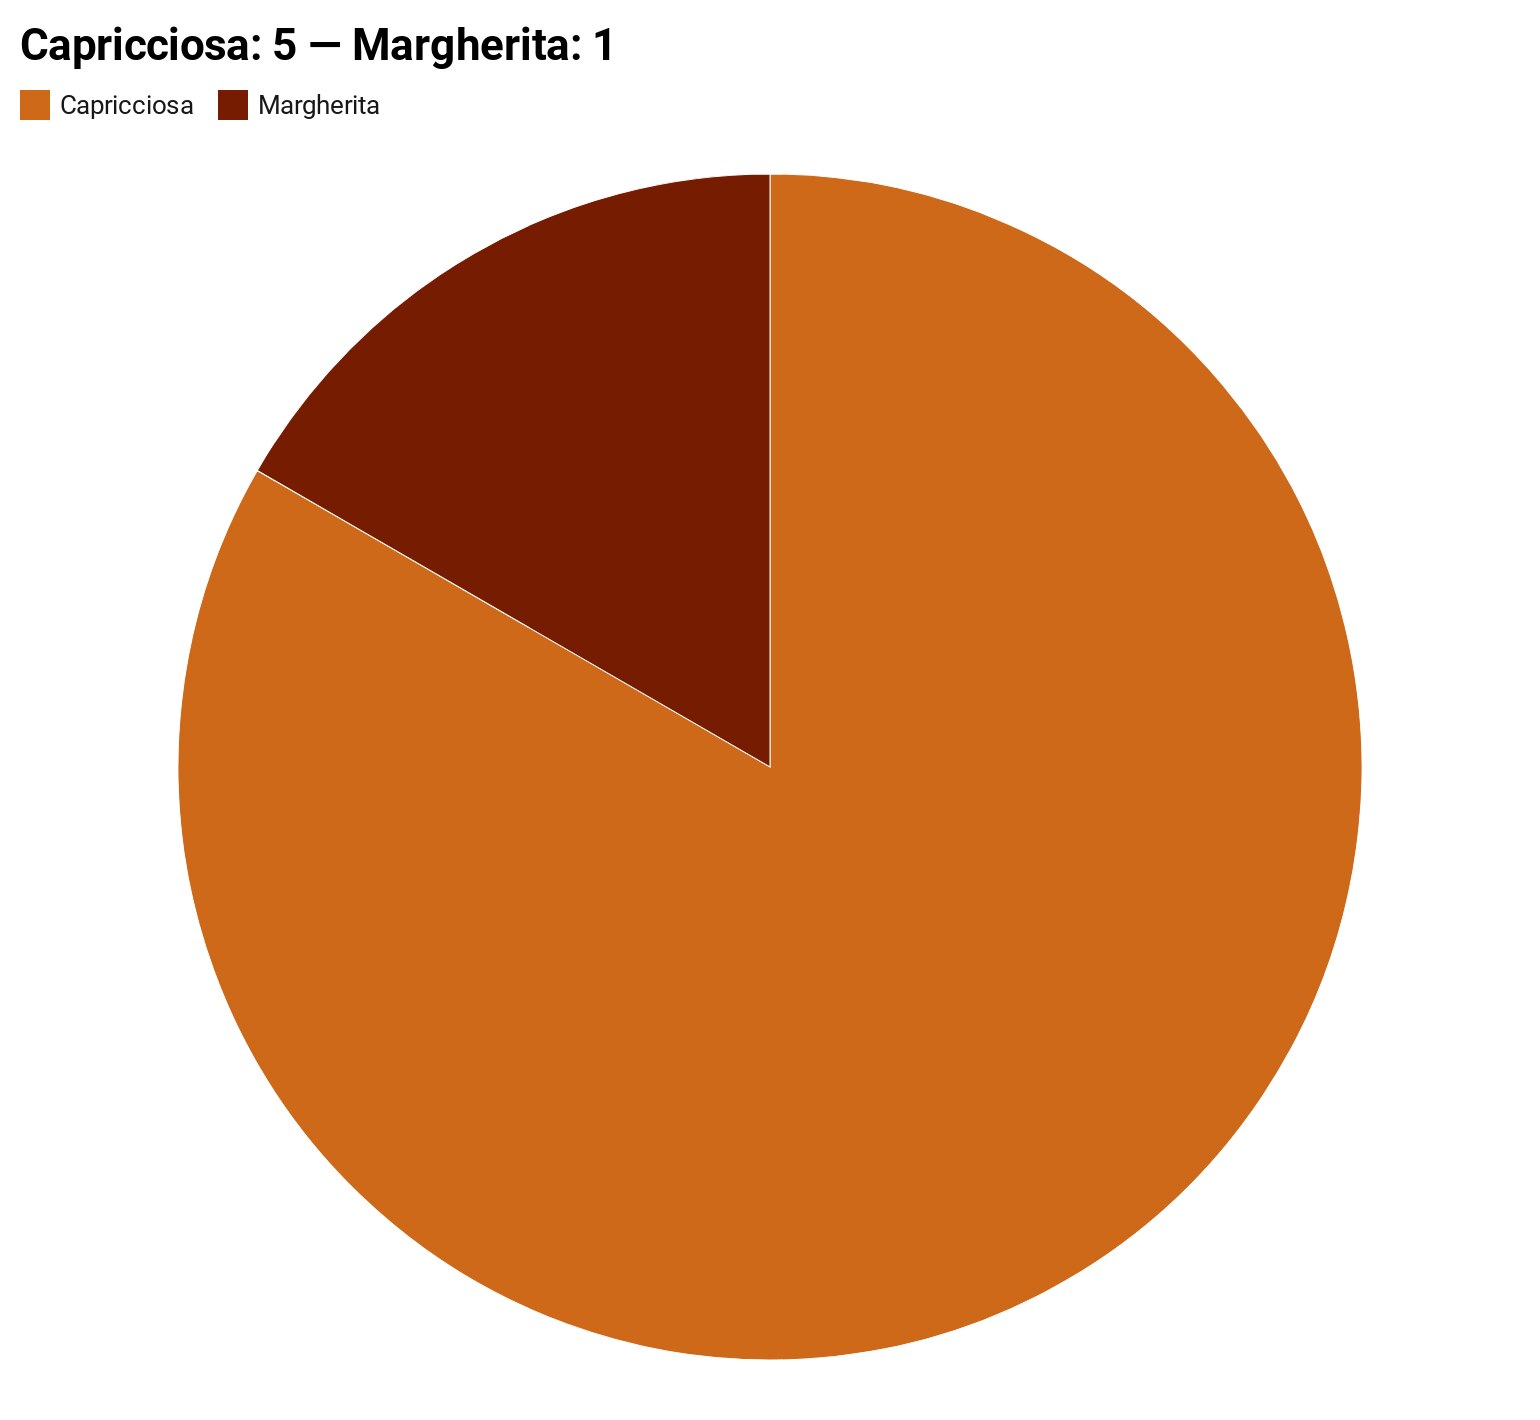 Pie chart shows small slice (1) for Margherita and a large (5) slice for capricciosa